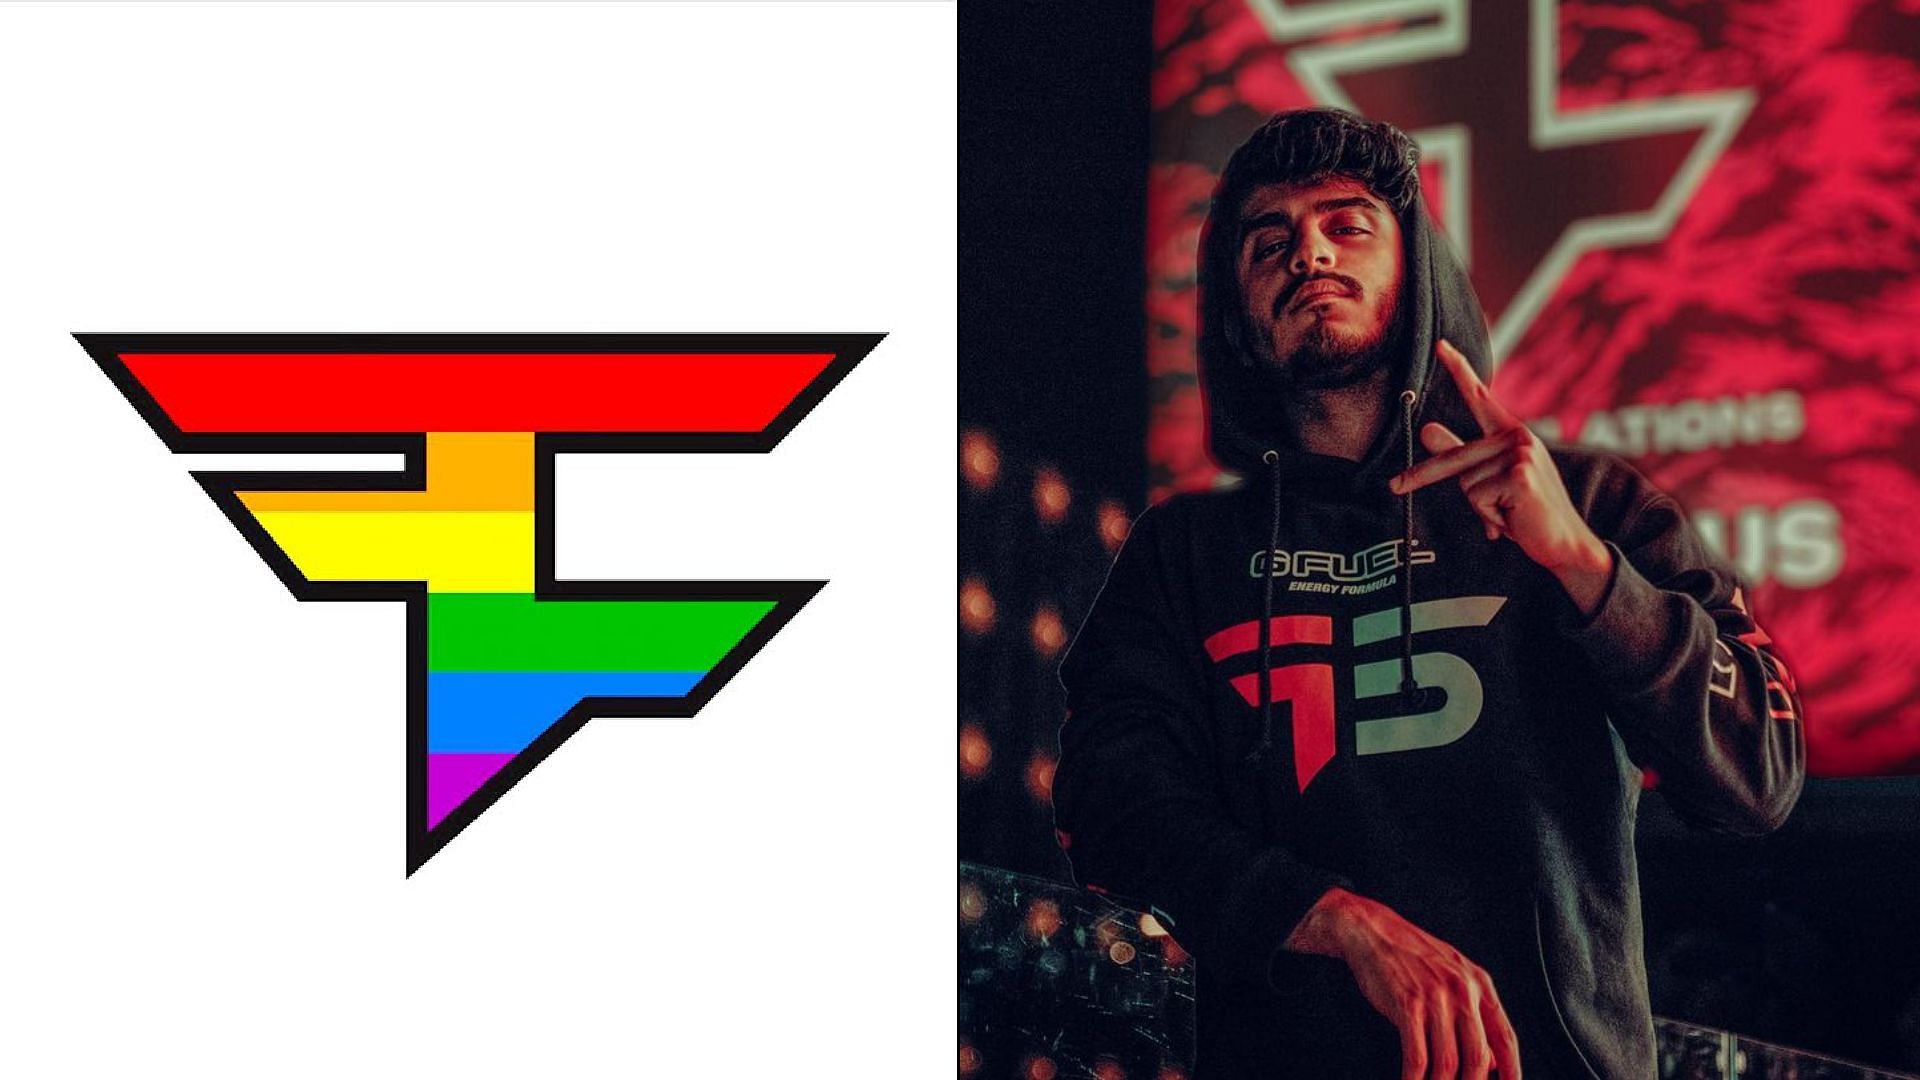 Virus leaves FaZe clan and his departure is far from amicable (Image via Sportskeeda)